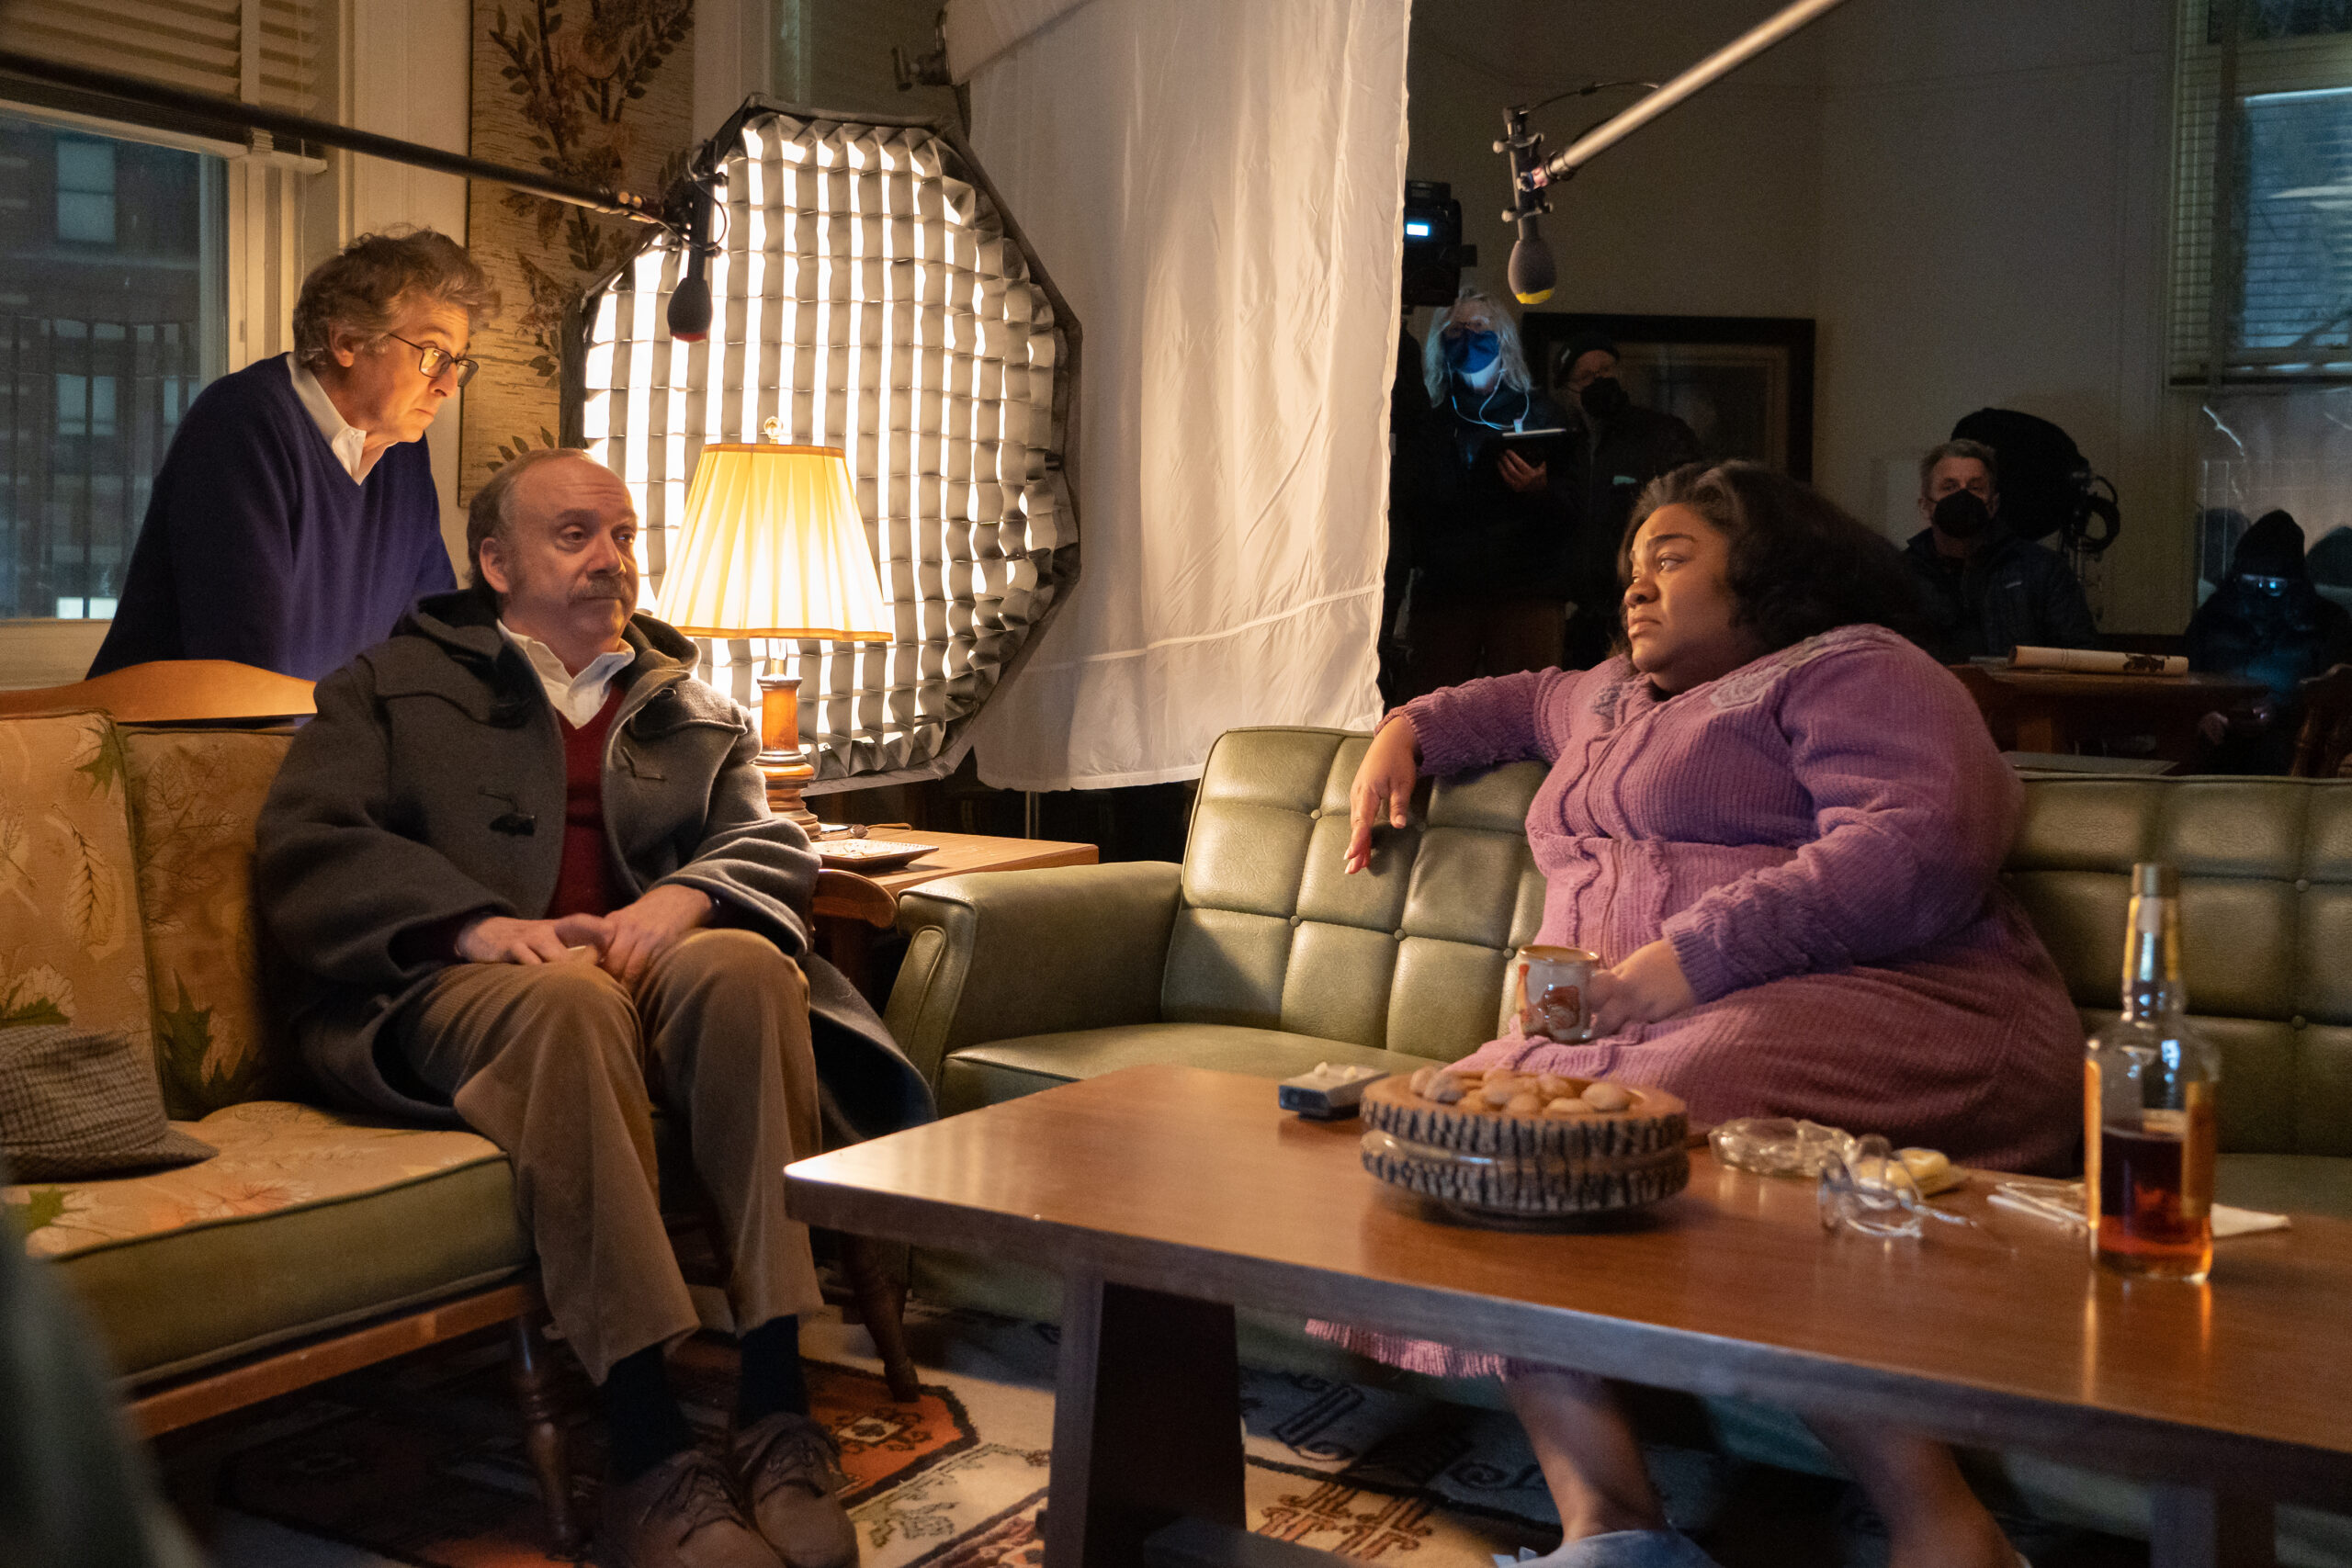 HO_00837_R (l-r.) Director Alexander Payne and actors Paul Giamatti and Da’Vine Joy Randolph on the set of their film THE HOLDOVERS, a Focus Features release.Credit: Seacia Pavao / © 2023 FOCUS FEATURES LLC